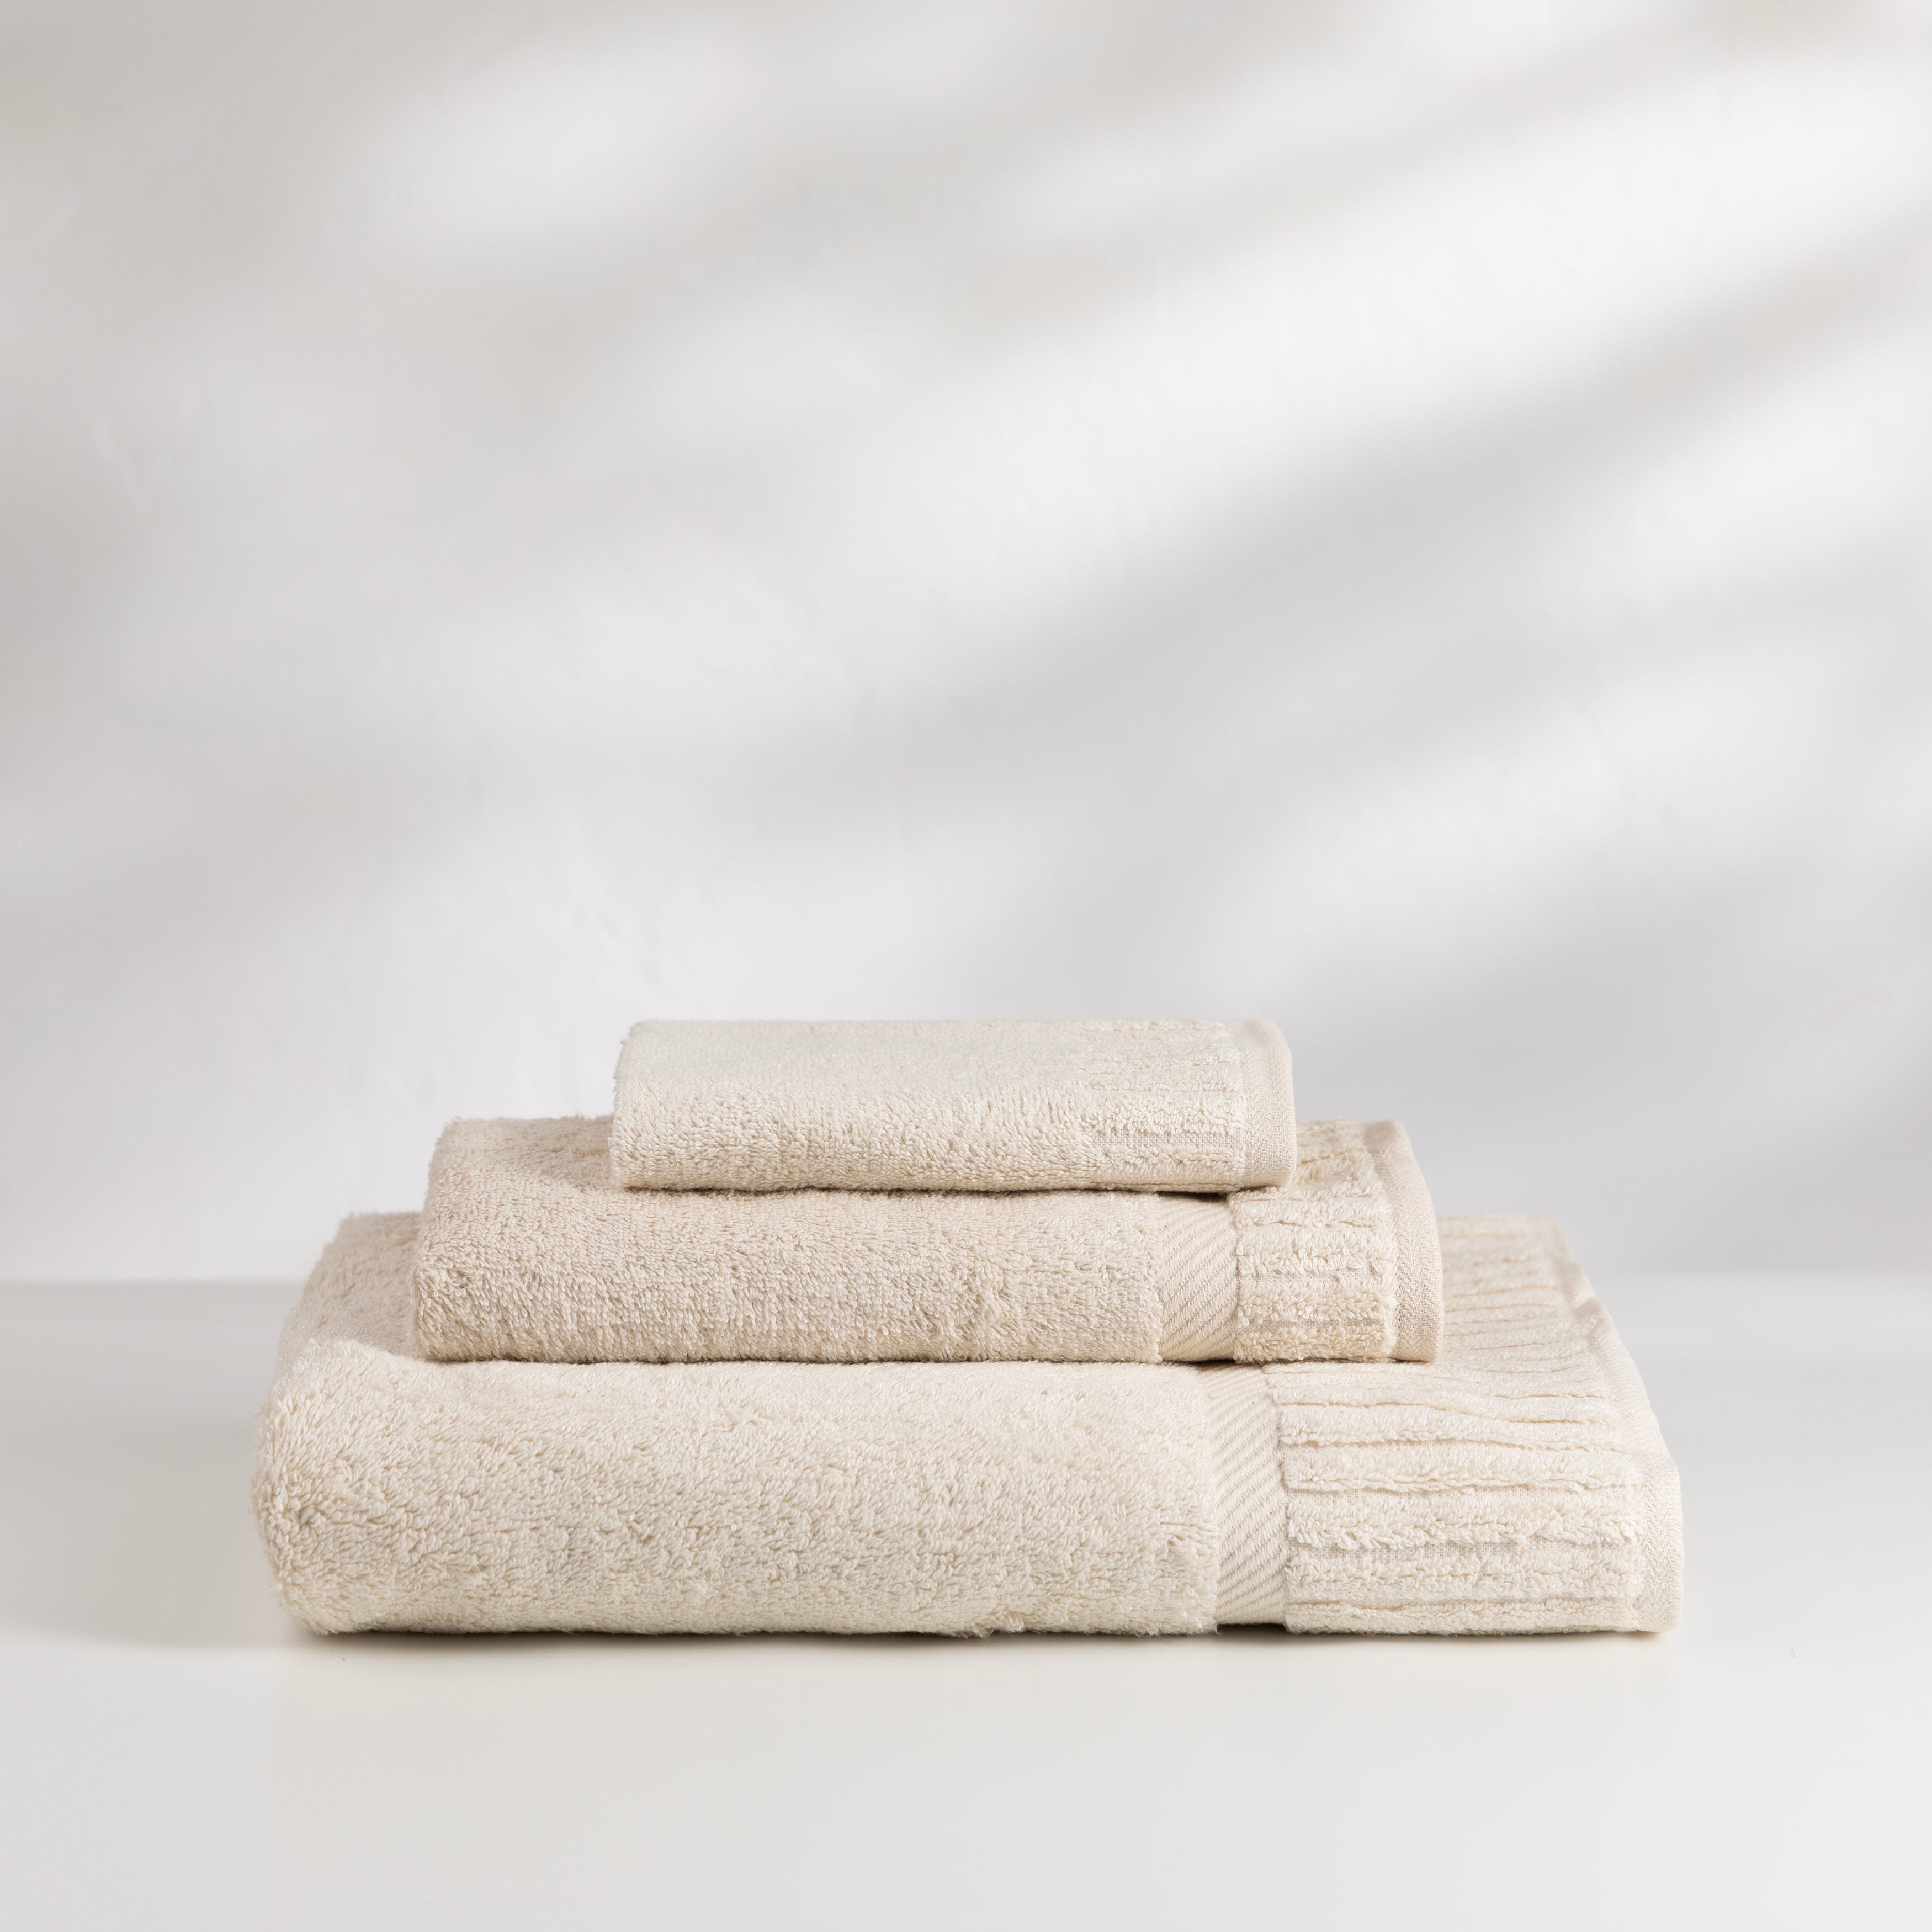 Luxury Hotel Pool Towels, Order Direct from Sobel Westex